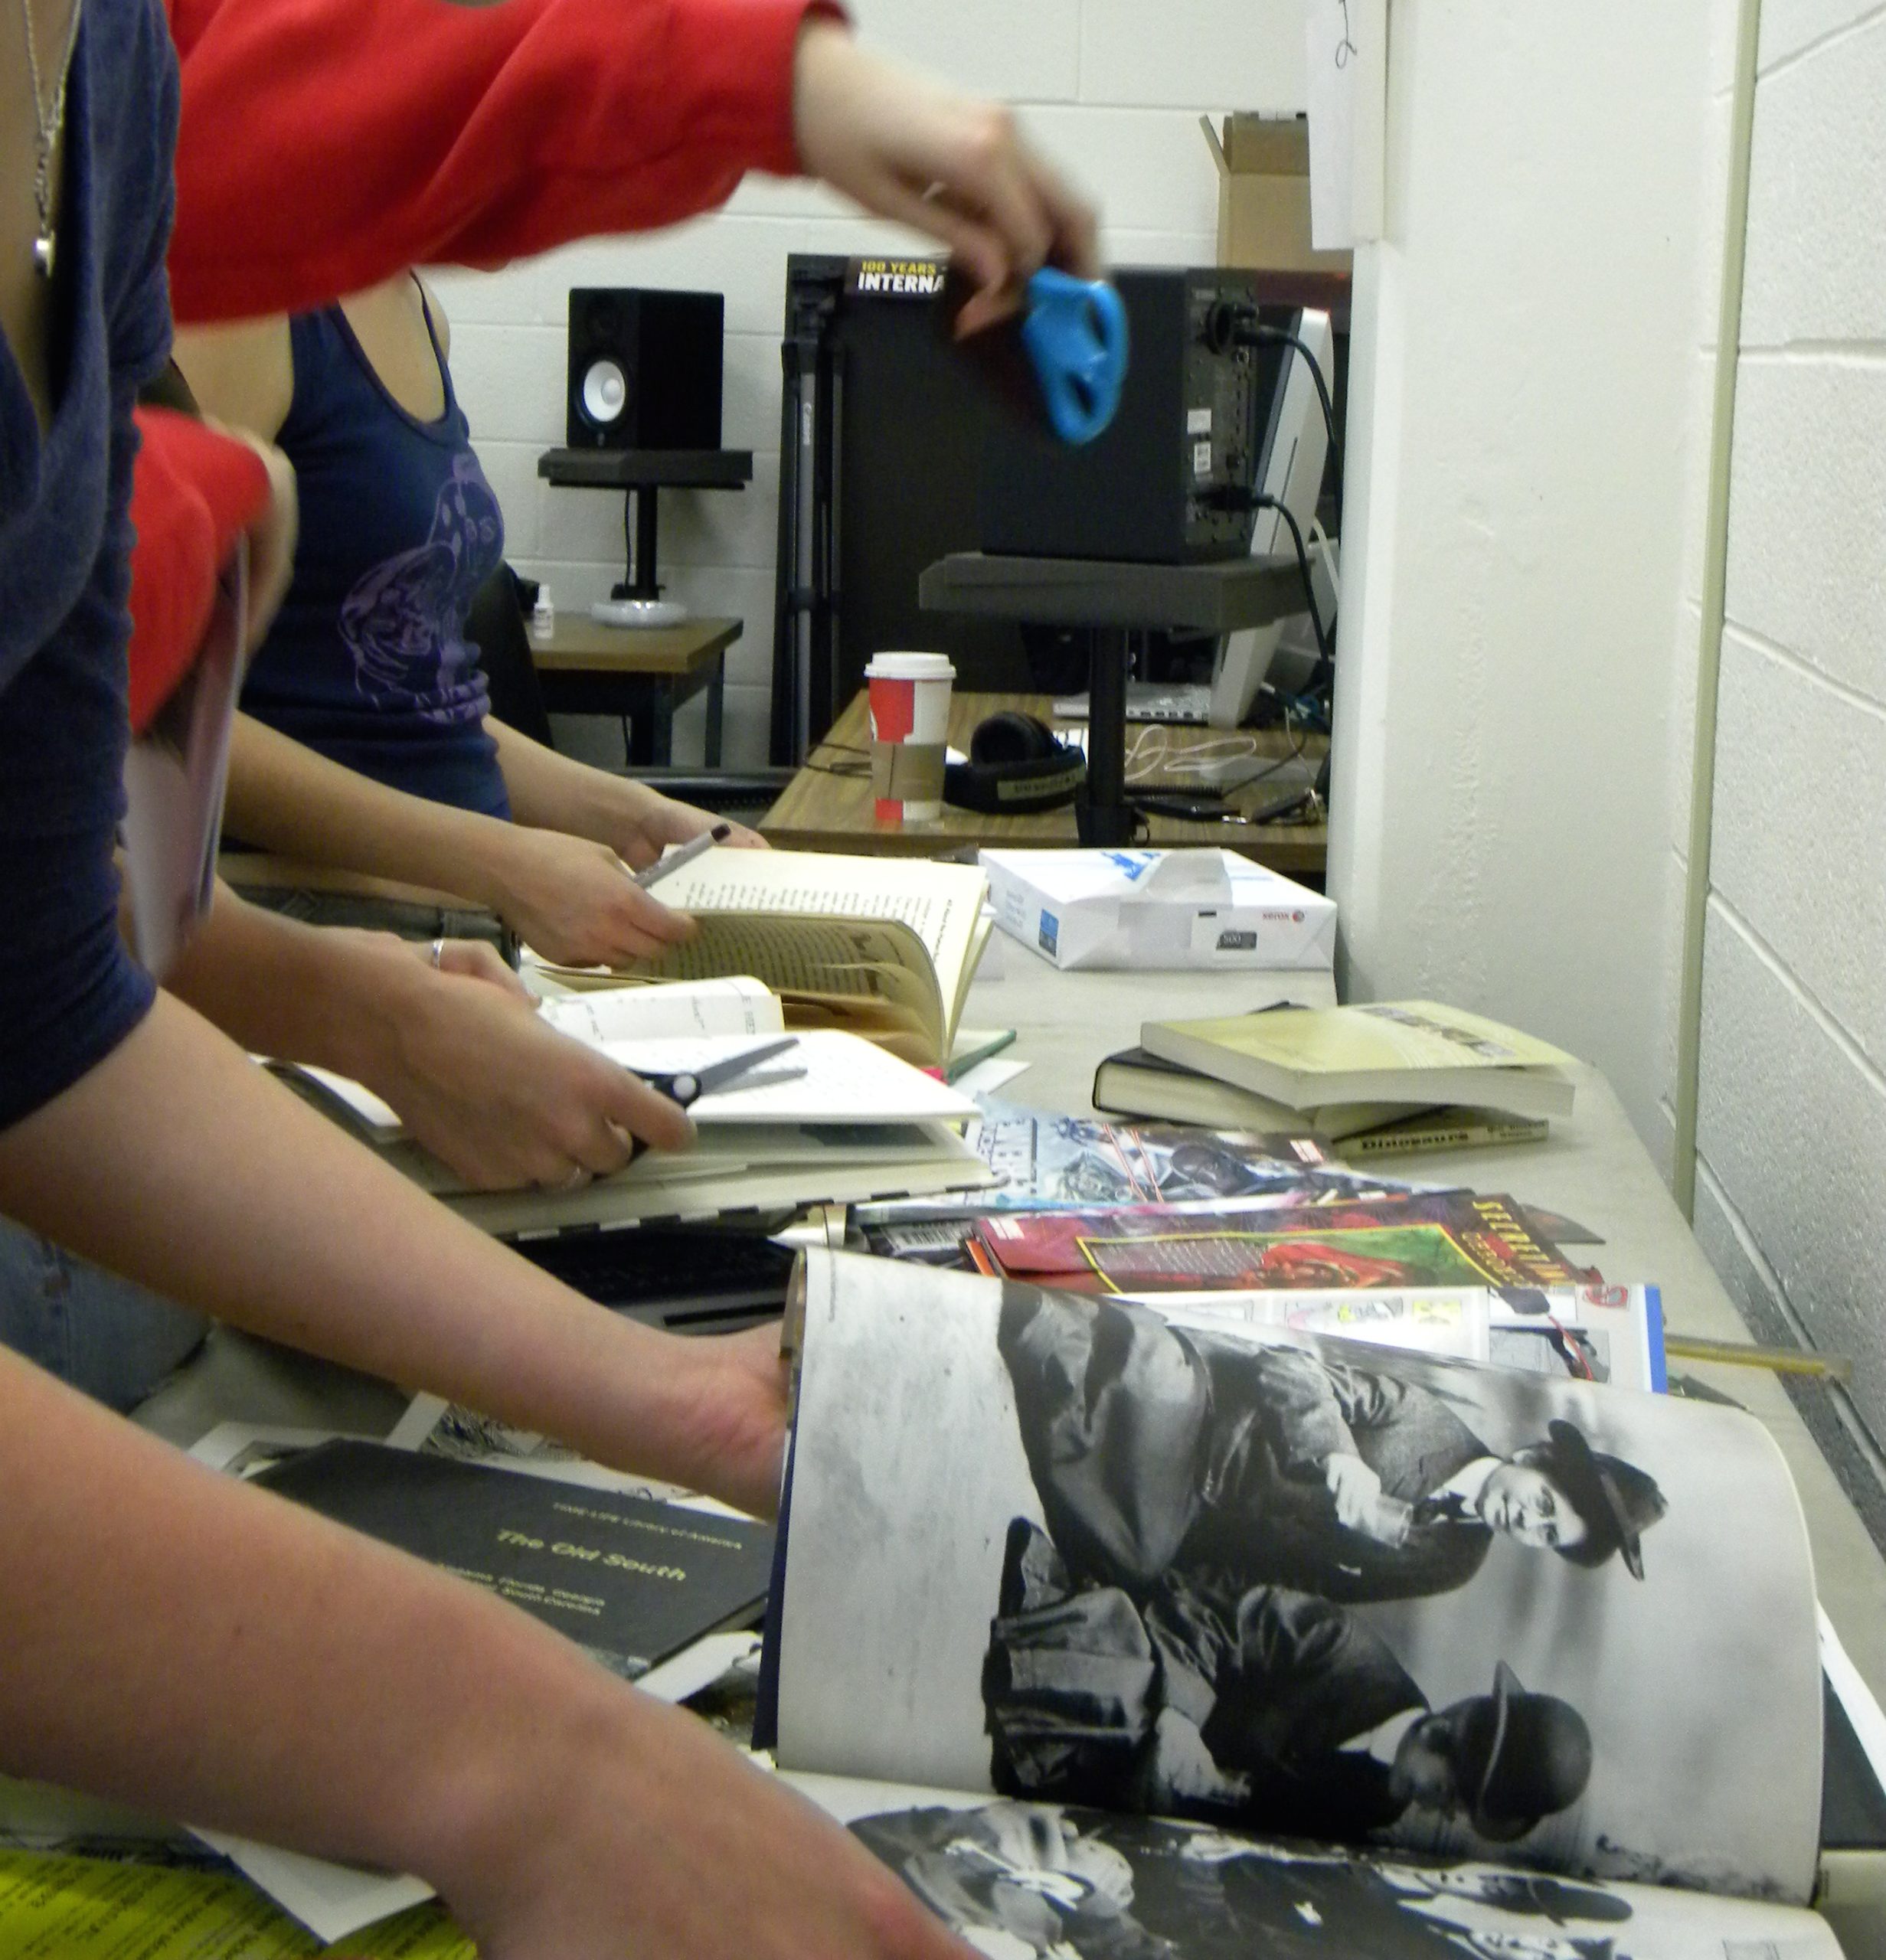 Students cutting up used books at a zine workshop, 2012